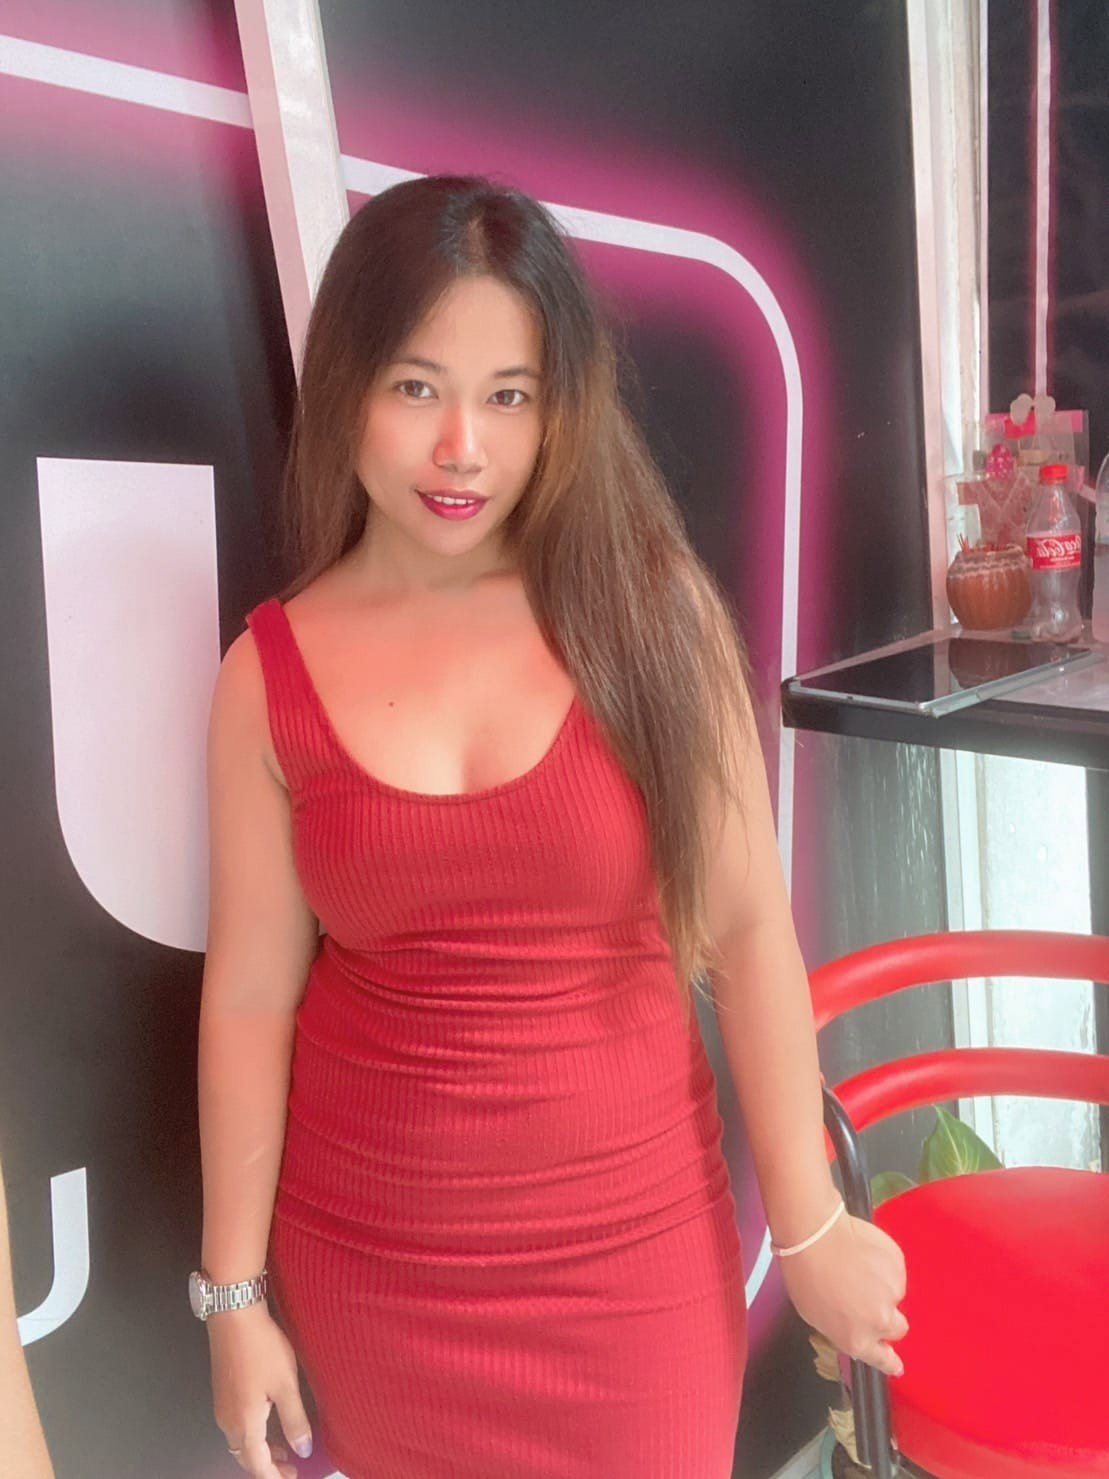 Photo by LuzyThai with the username @LuzyThai, who is a star user,  August 6, 2023 at 11:48 AM and the text says '#thai #thailand #asian #asia #thaigirl #thaibabe #onlyfans #Contentcreater #loyalfans #asiandoll #girlnextdoor #nudes #amateur #homemade #closeups #pussy
Join me now! FREE TRIAL⚡ https://onlyfans.com/action/trial/x2qpkm5il6mryxbmzmr2uk7kv2dav7g5'